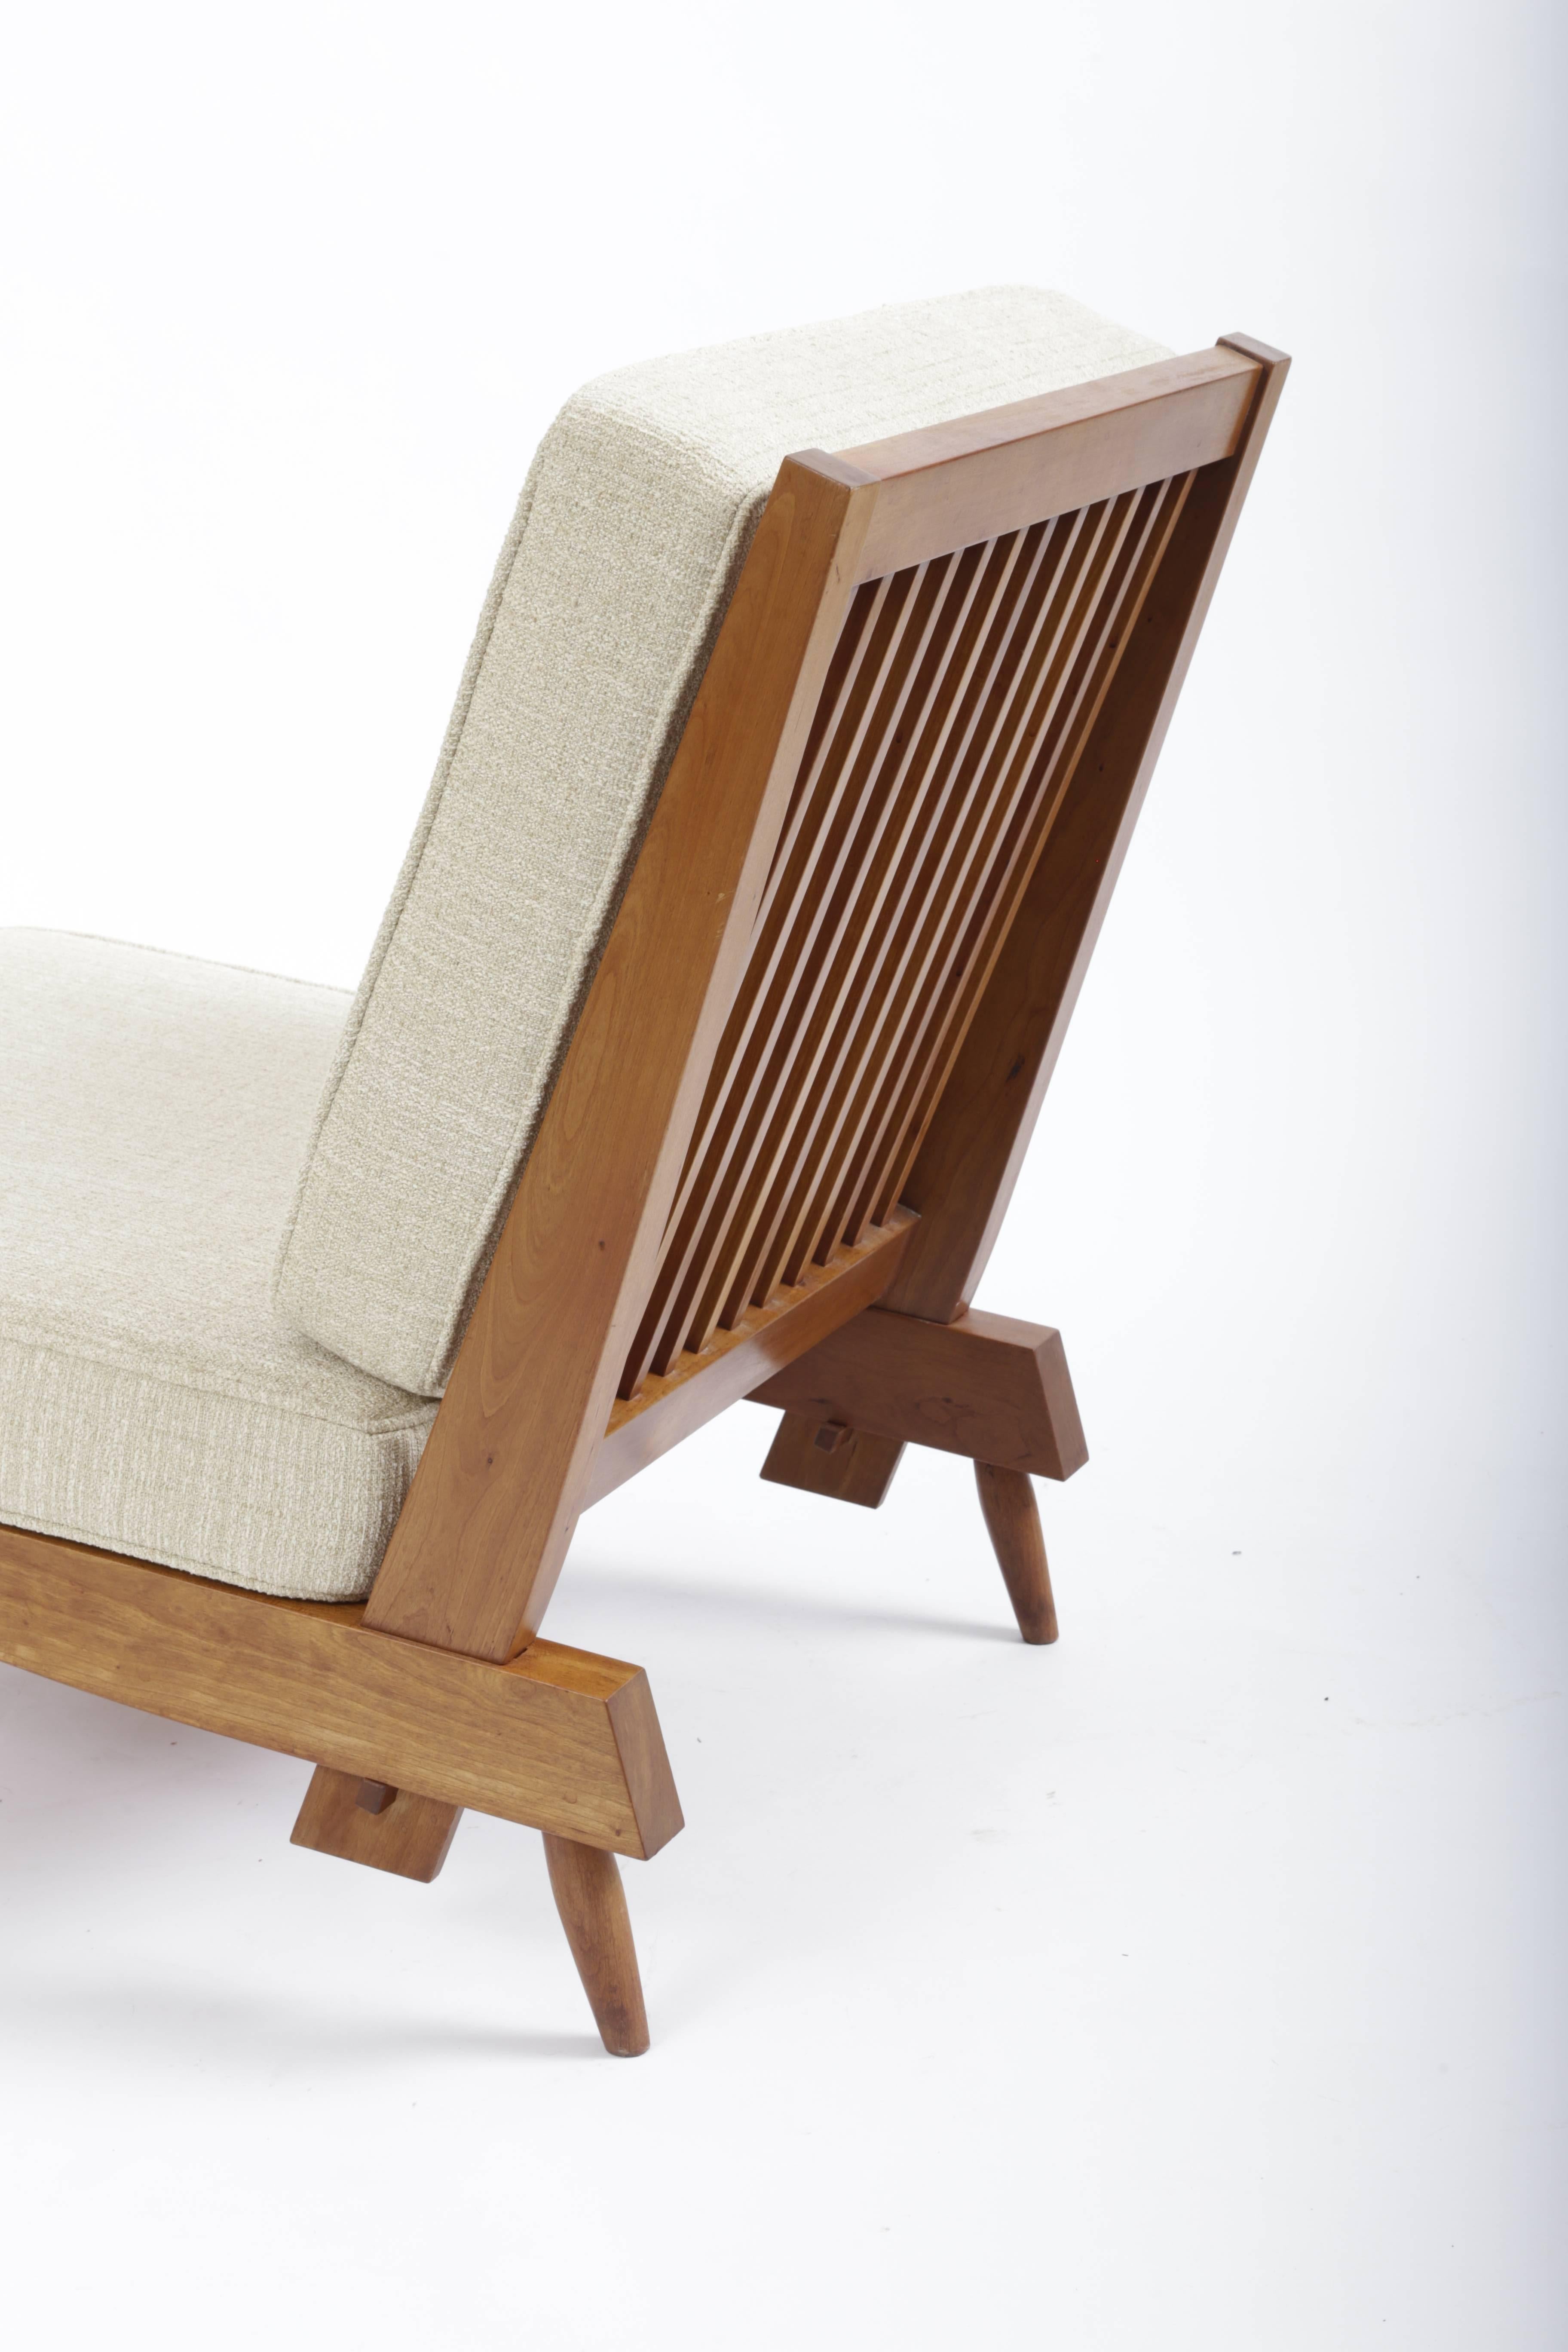 Hand-Crafted Cherry Spindle Cushion Chair by George Nakashima For Sale